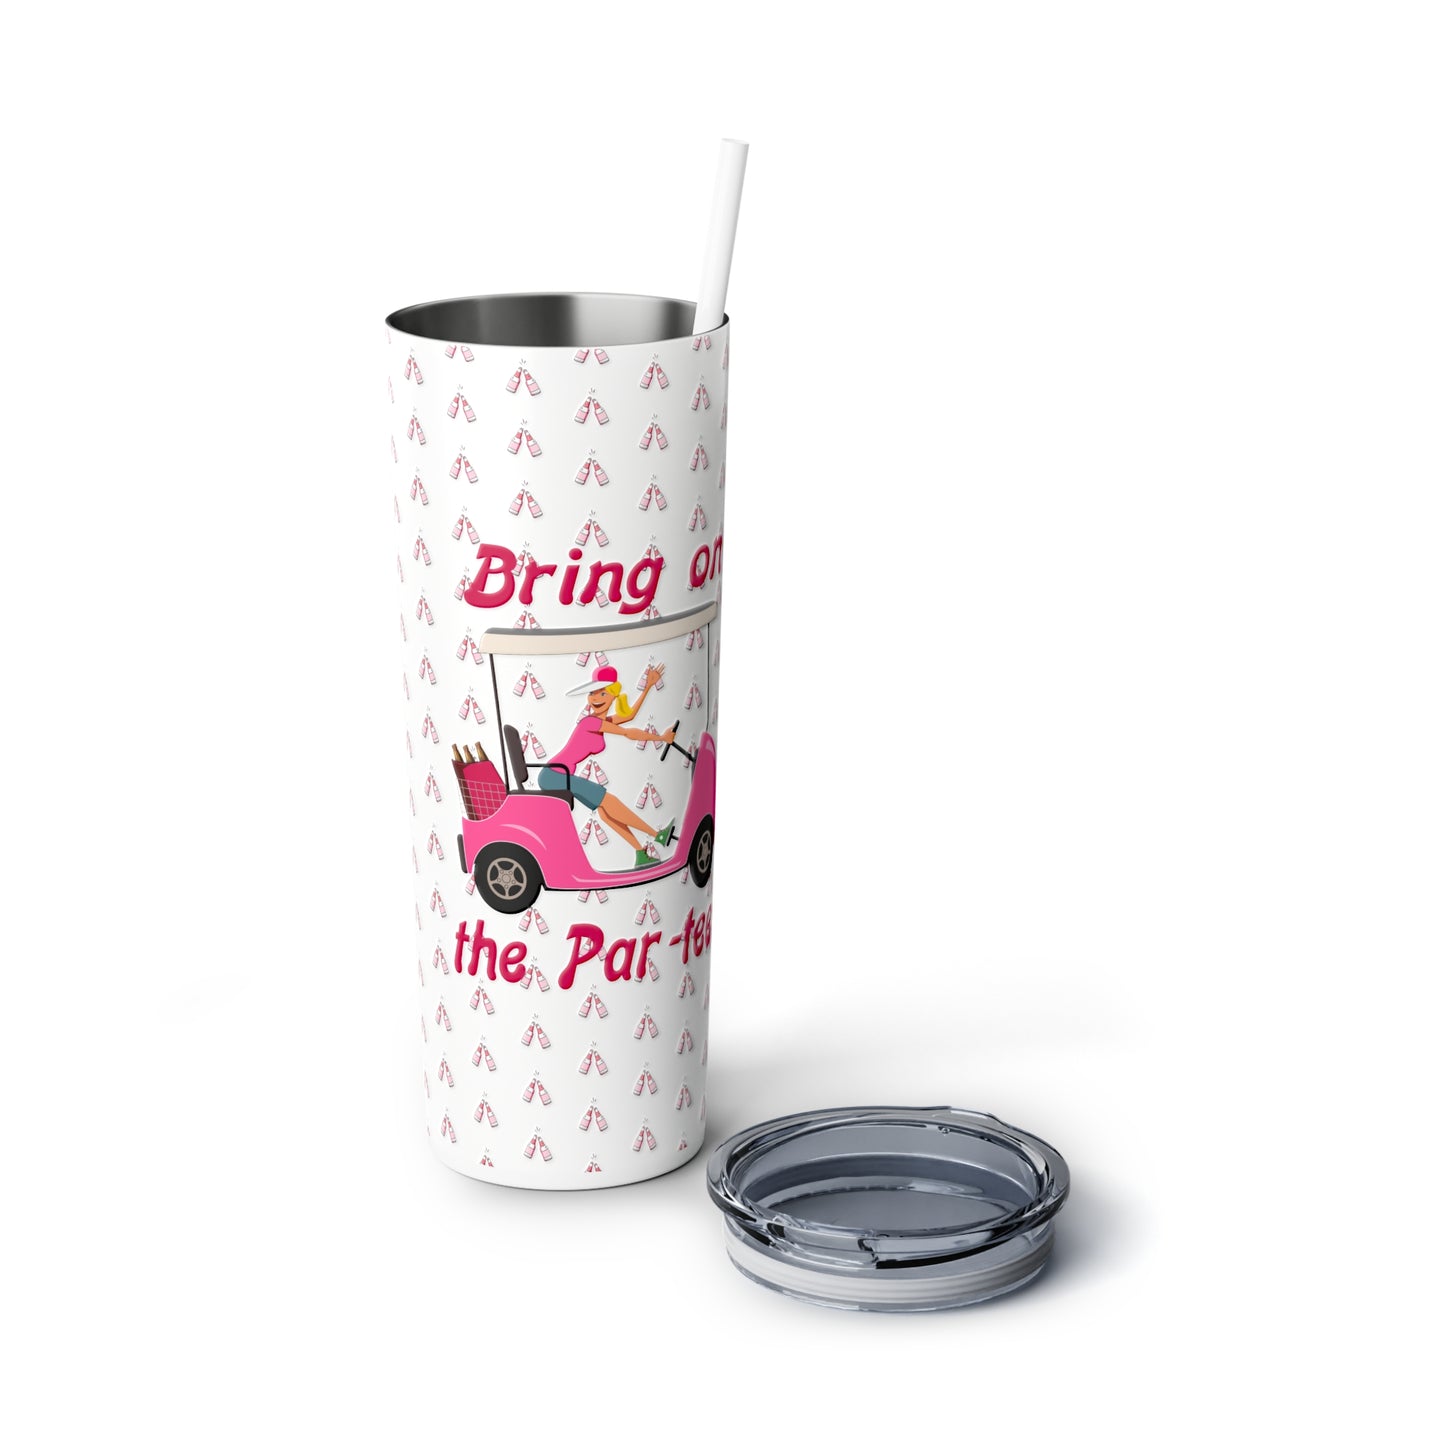 Bring on the Par Tee Skinny Steel Tumbler with Straw, 20oz